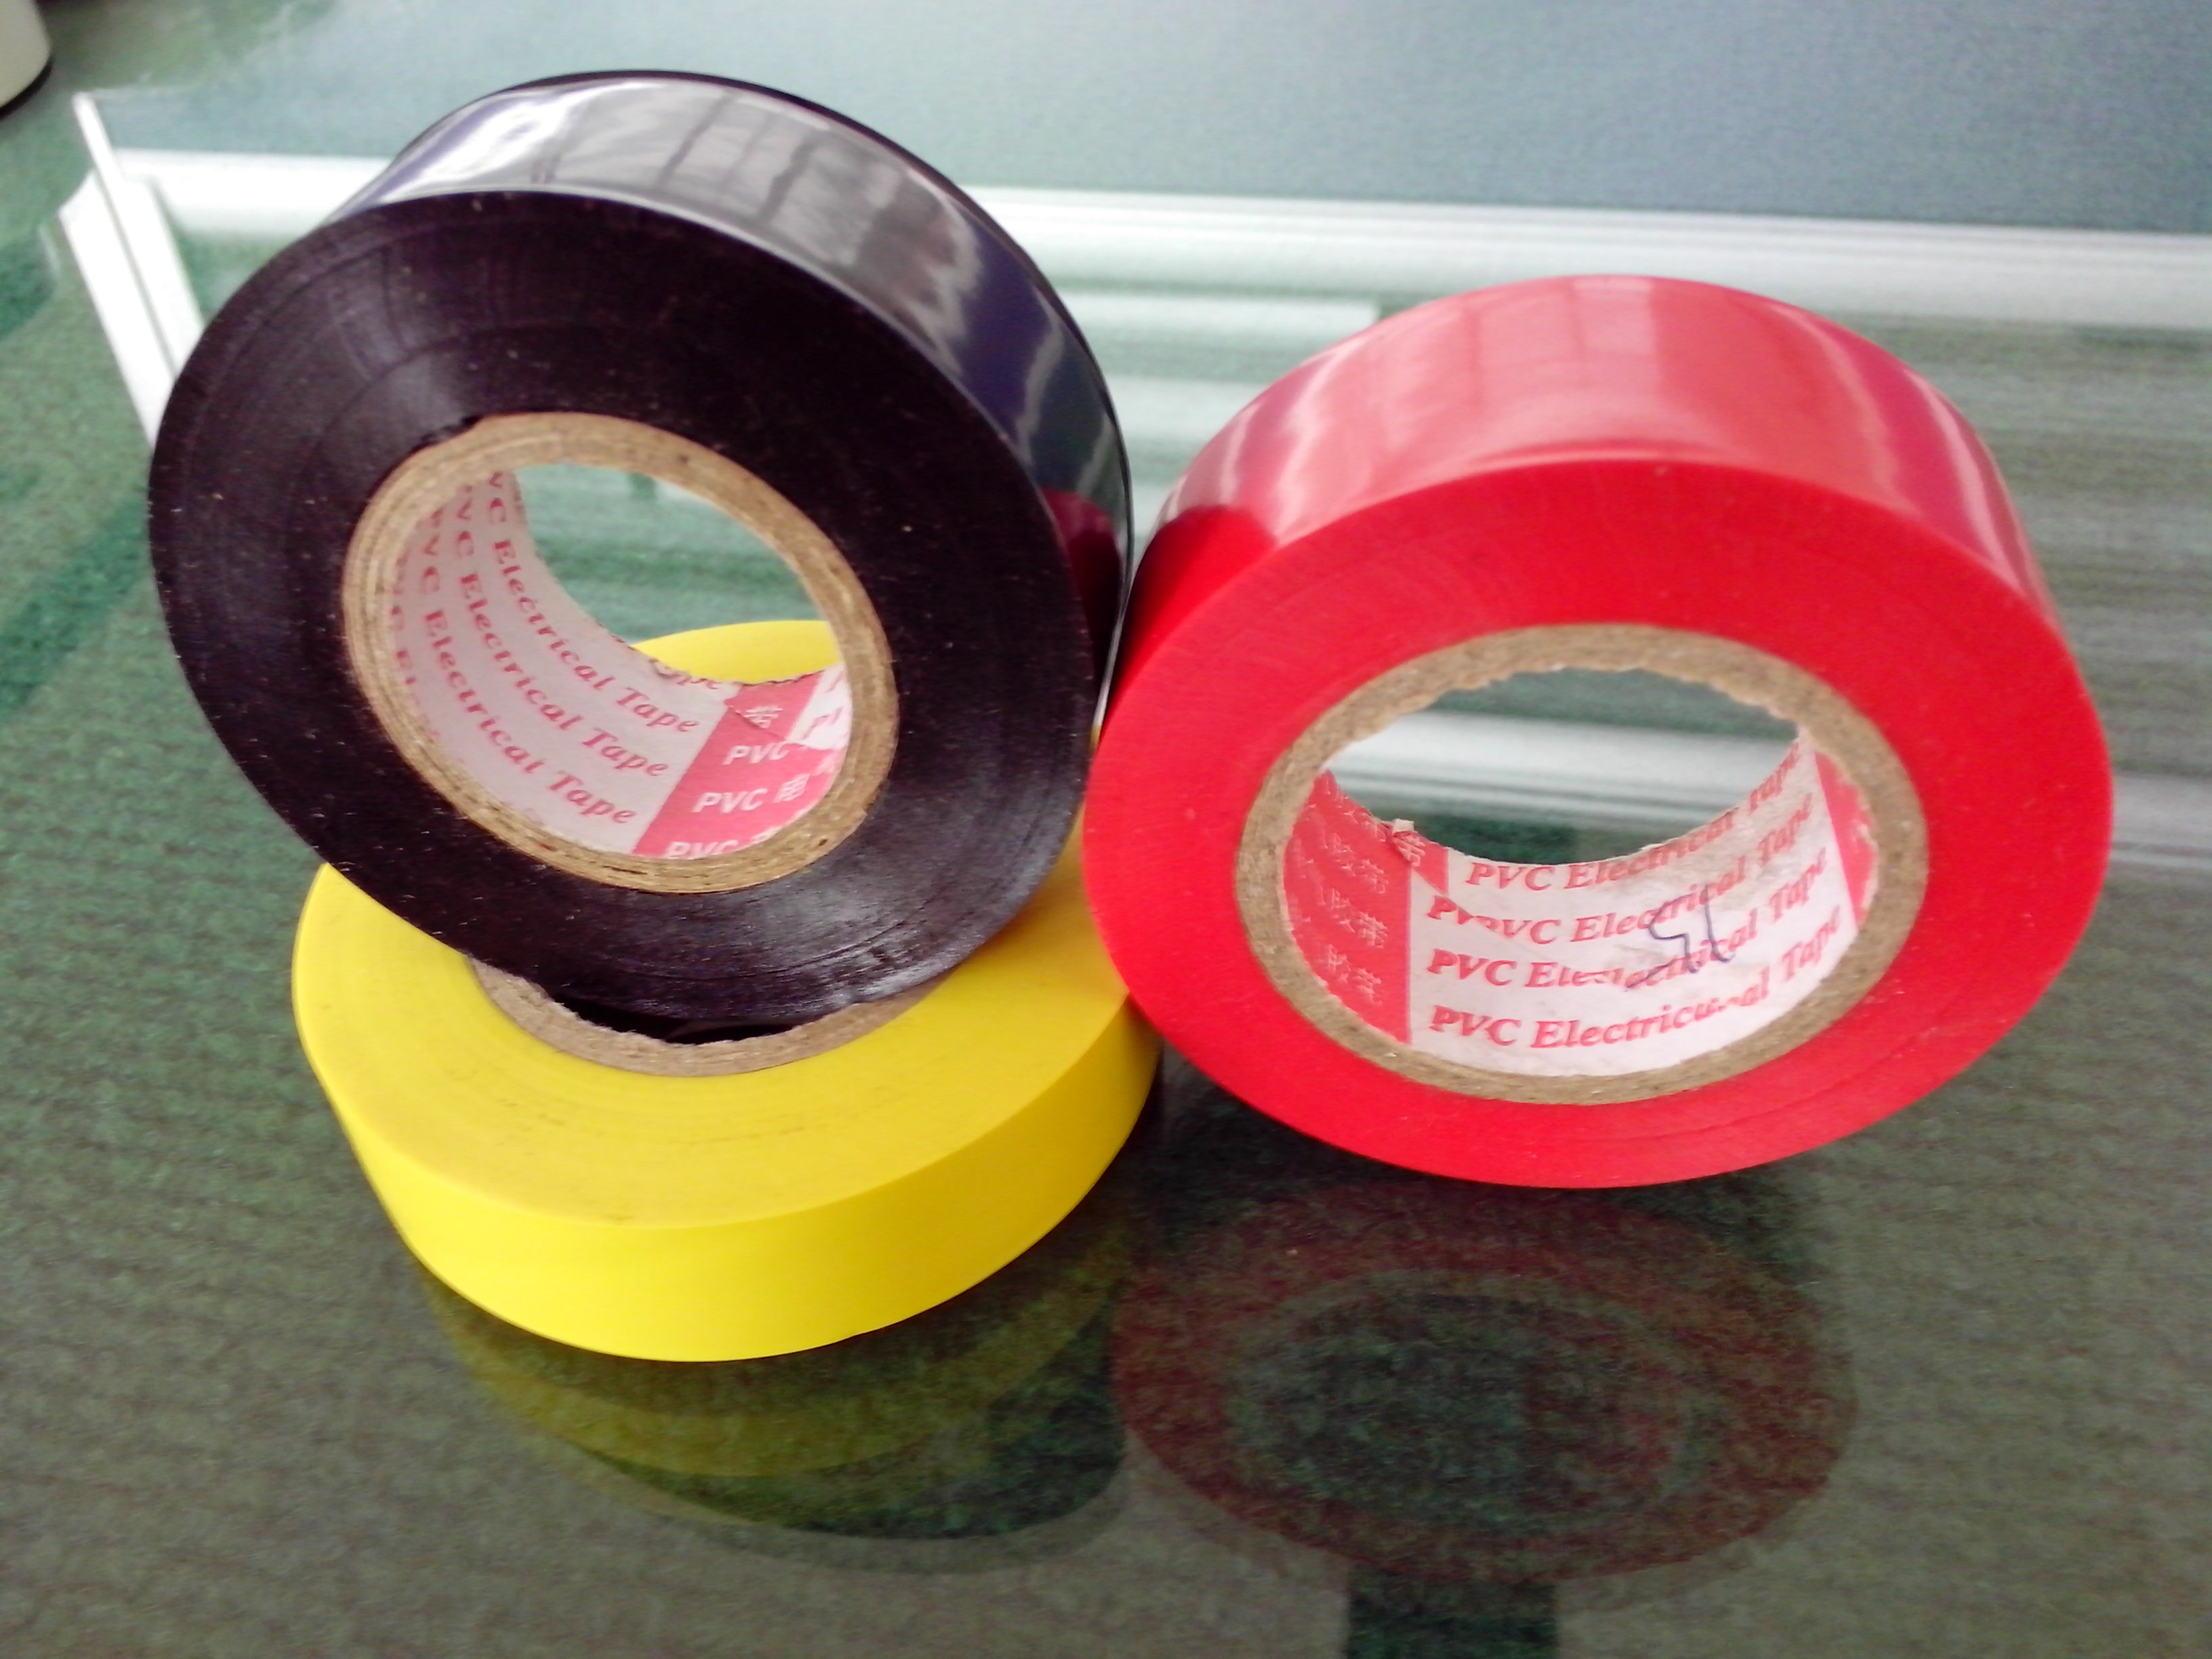 pvc electrical insulation tape